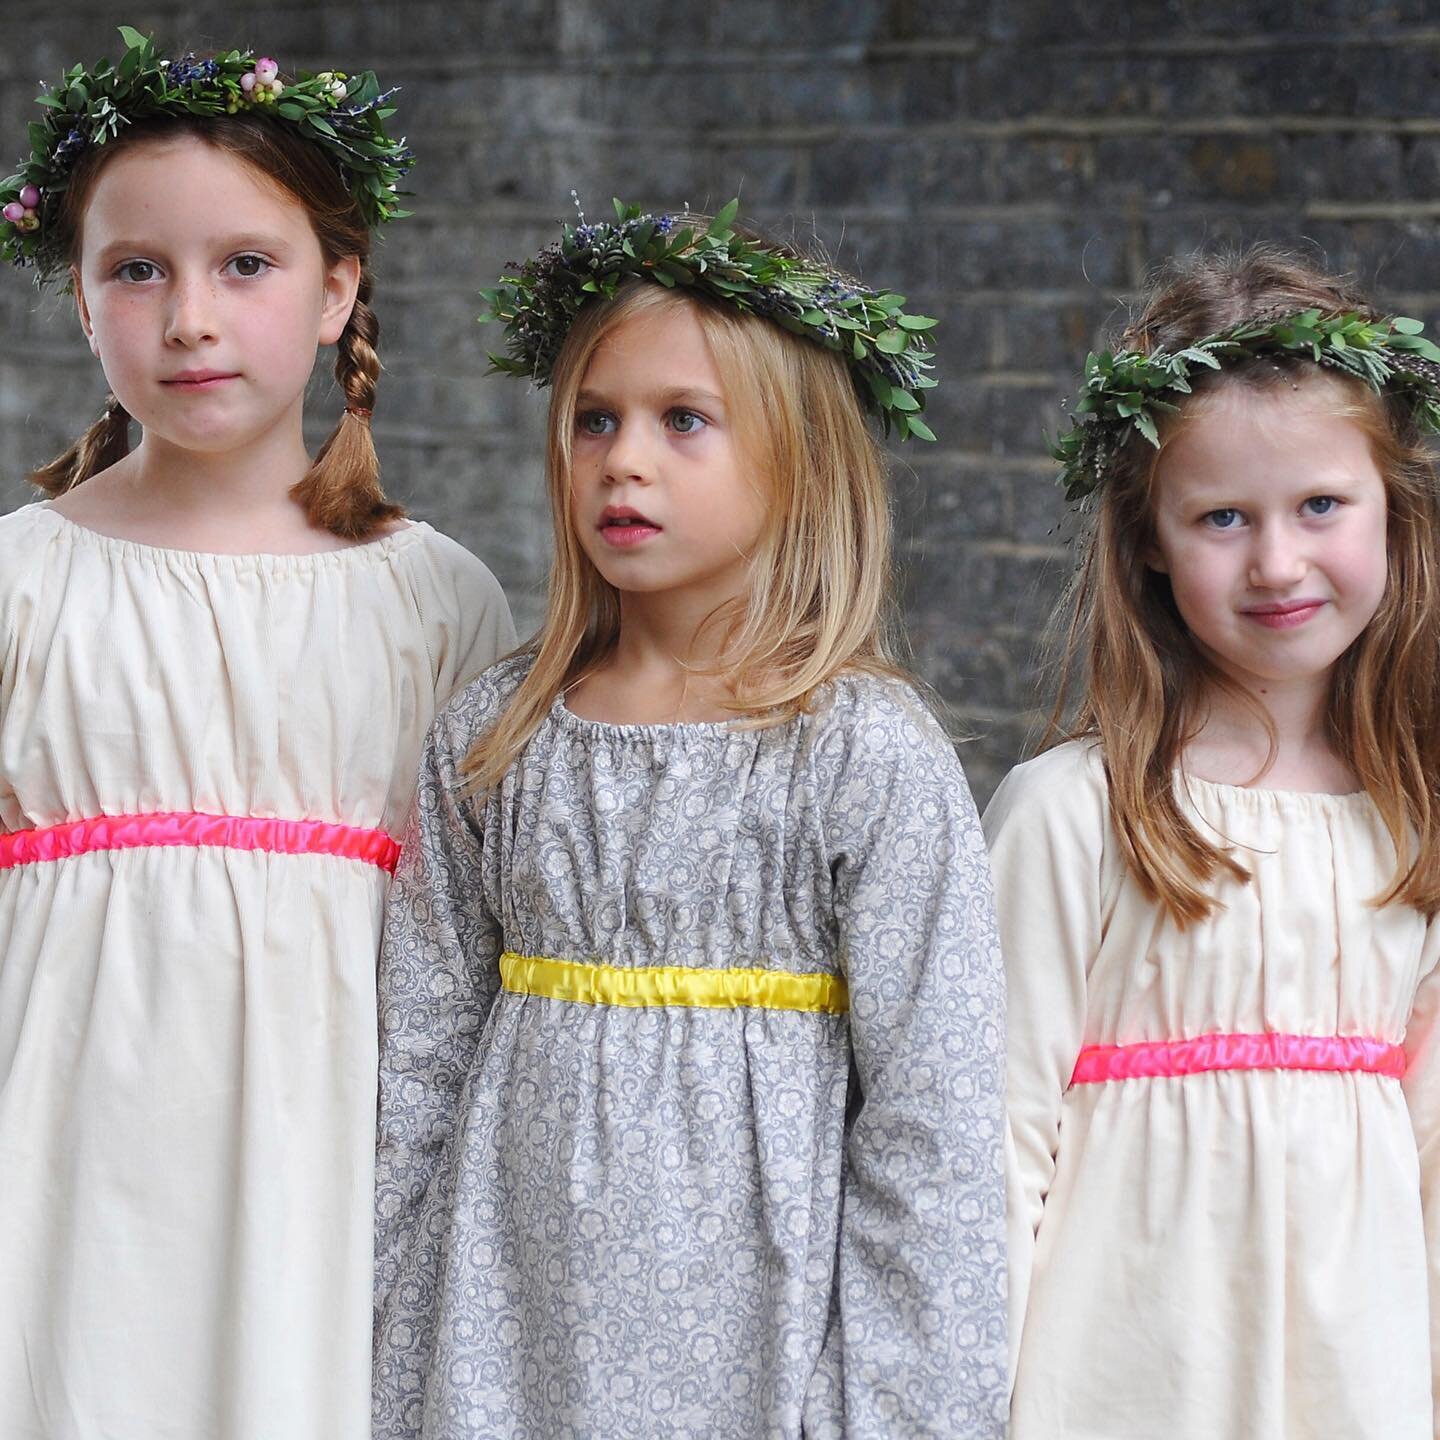 A gorgeous trio 💜 wearing our timeless and classic empire line dresses. Perfect for the festive season. 

#girlsdress #cottondress #kidsfashion #fashionthatlasts #juniperberrykids #londonkidswear